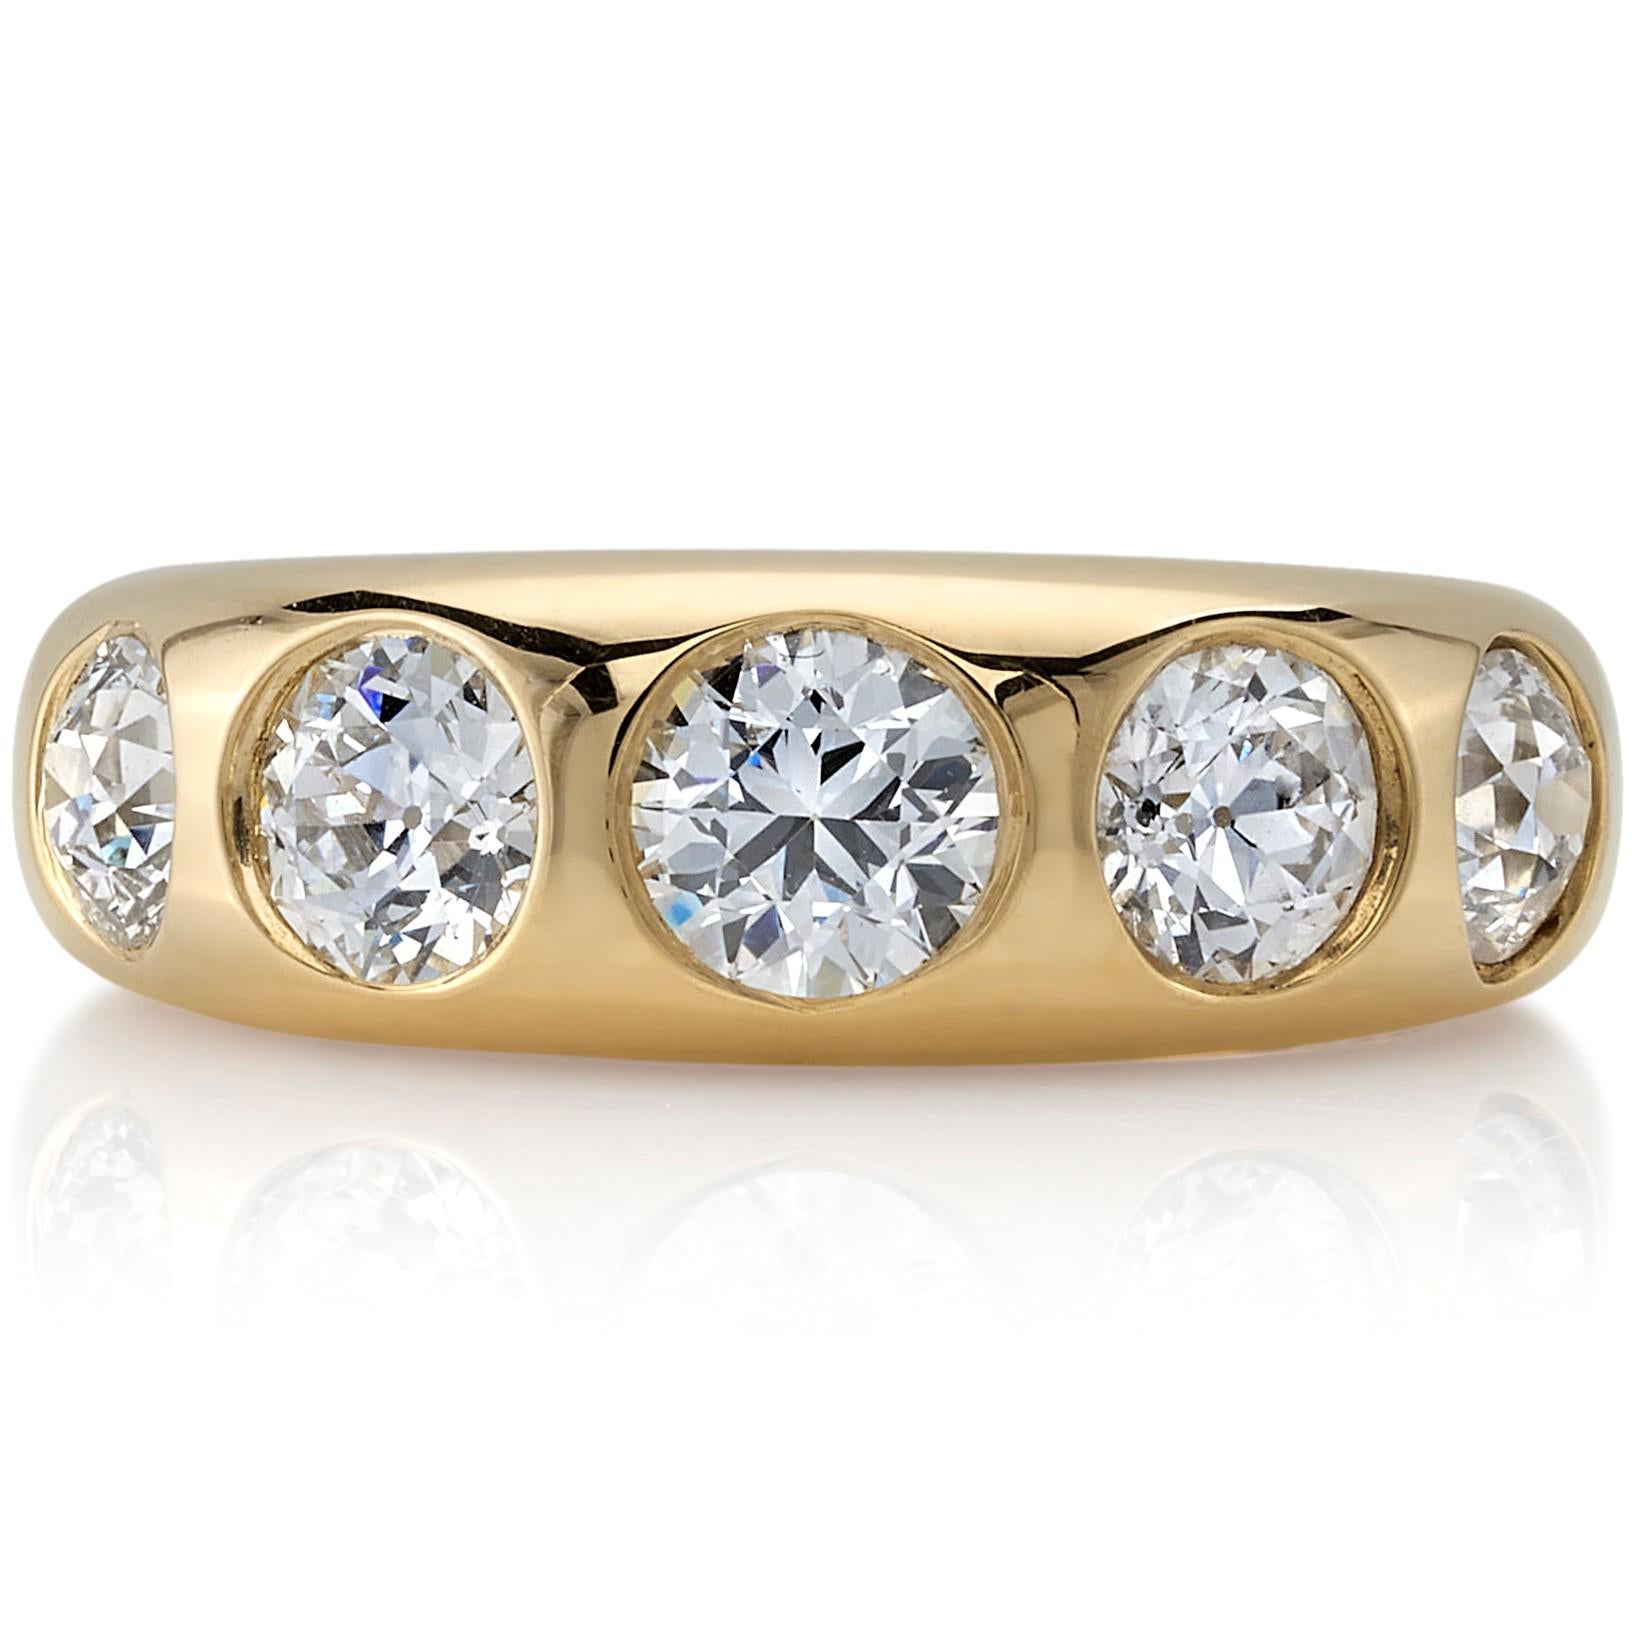 Women's 1.64 Carat Old European Cut Diamonds Set in a Handcrafted Domed Yellow Gold Band